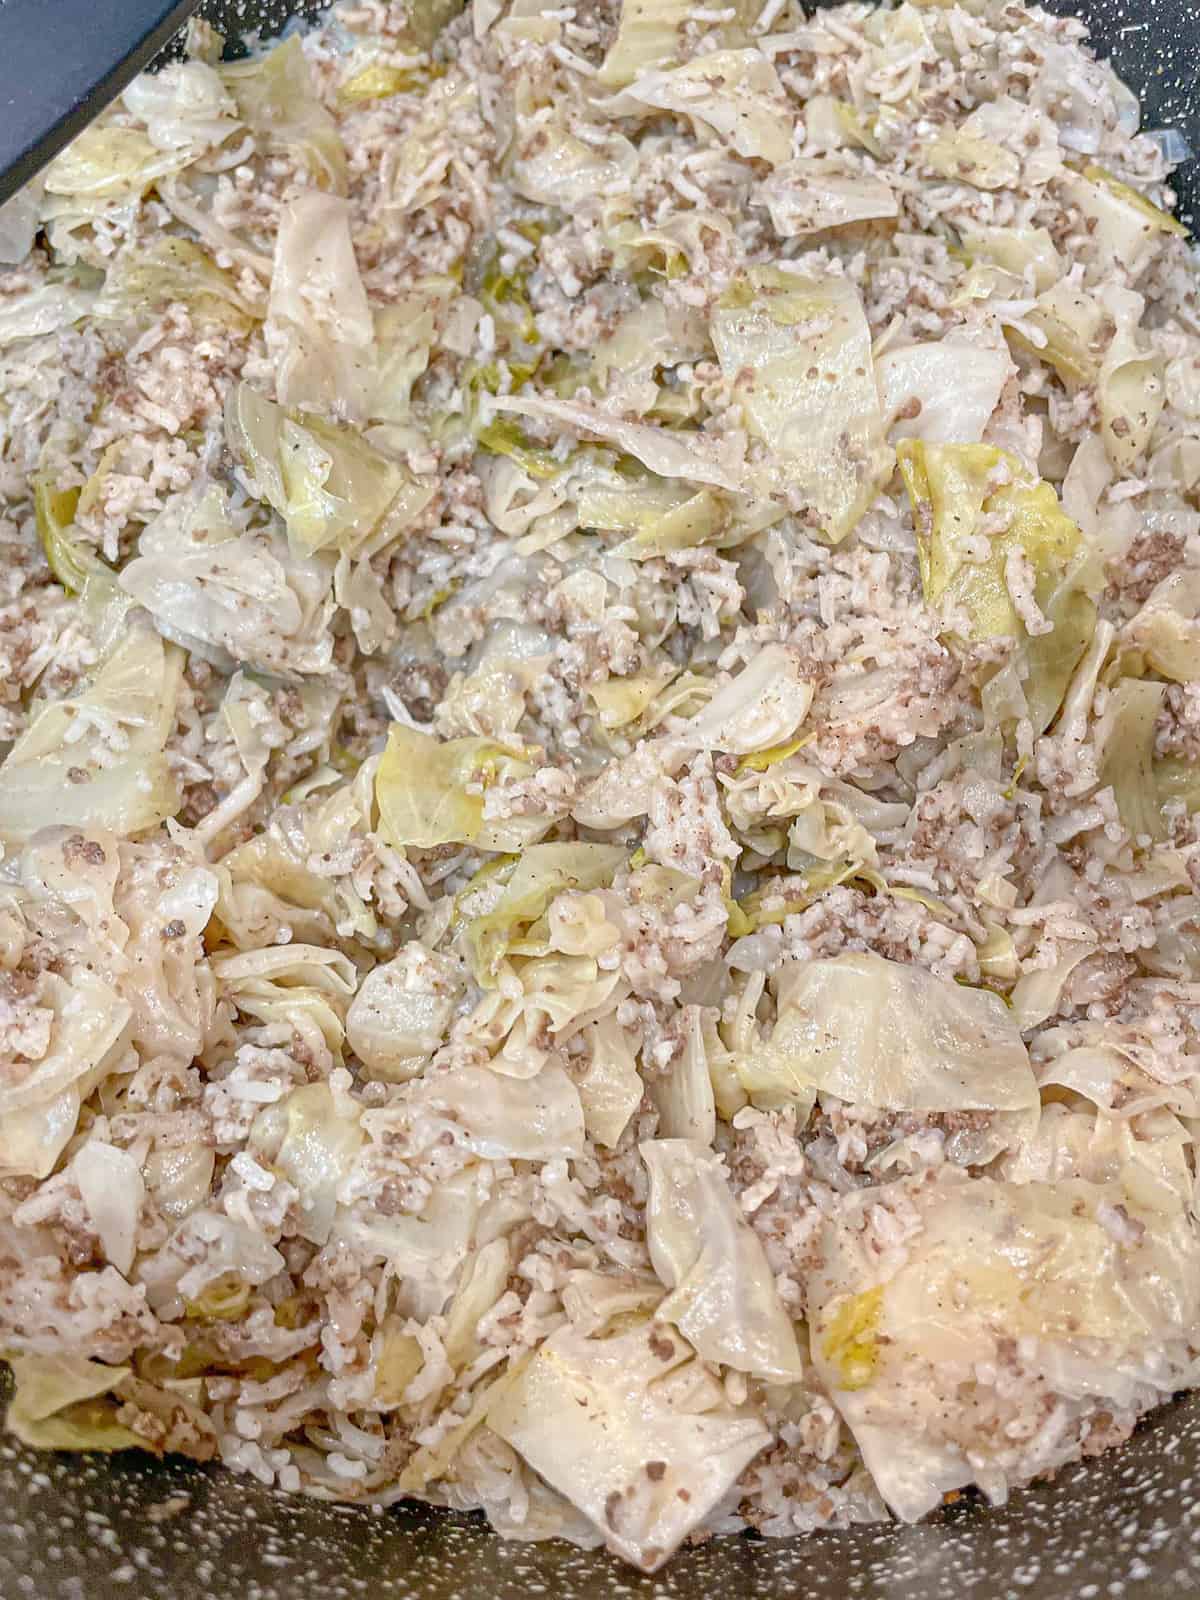 This deconstructed Lebanese stuffed cabbage retains all of the dish's delicious tastes without the hassle of folding individual cabbage rolls.